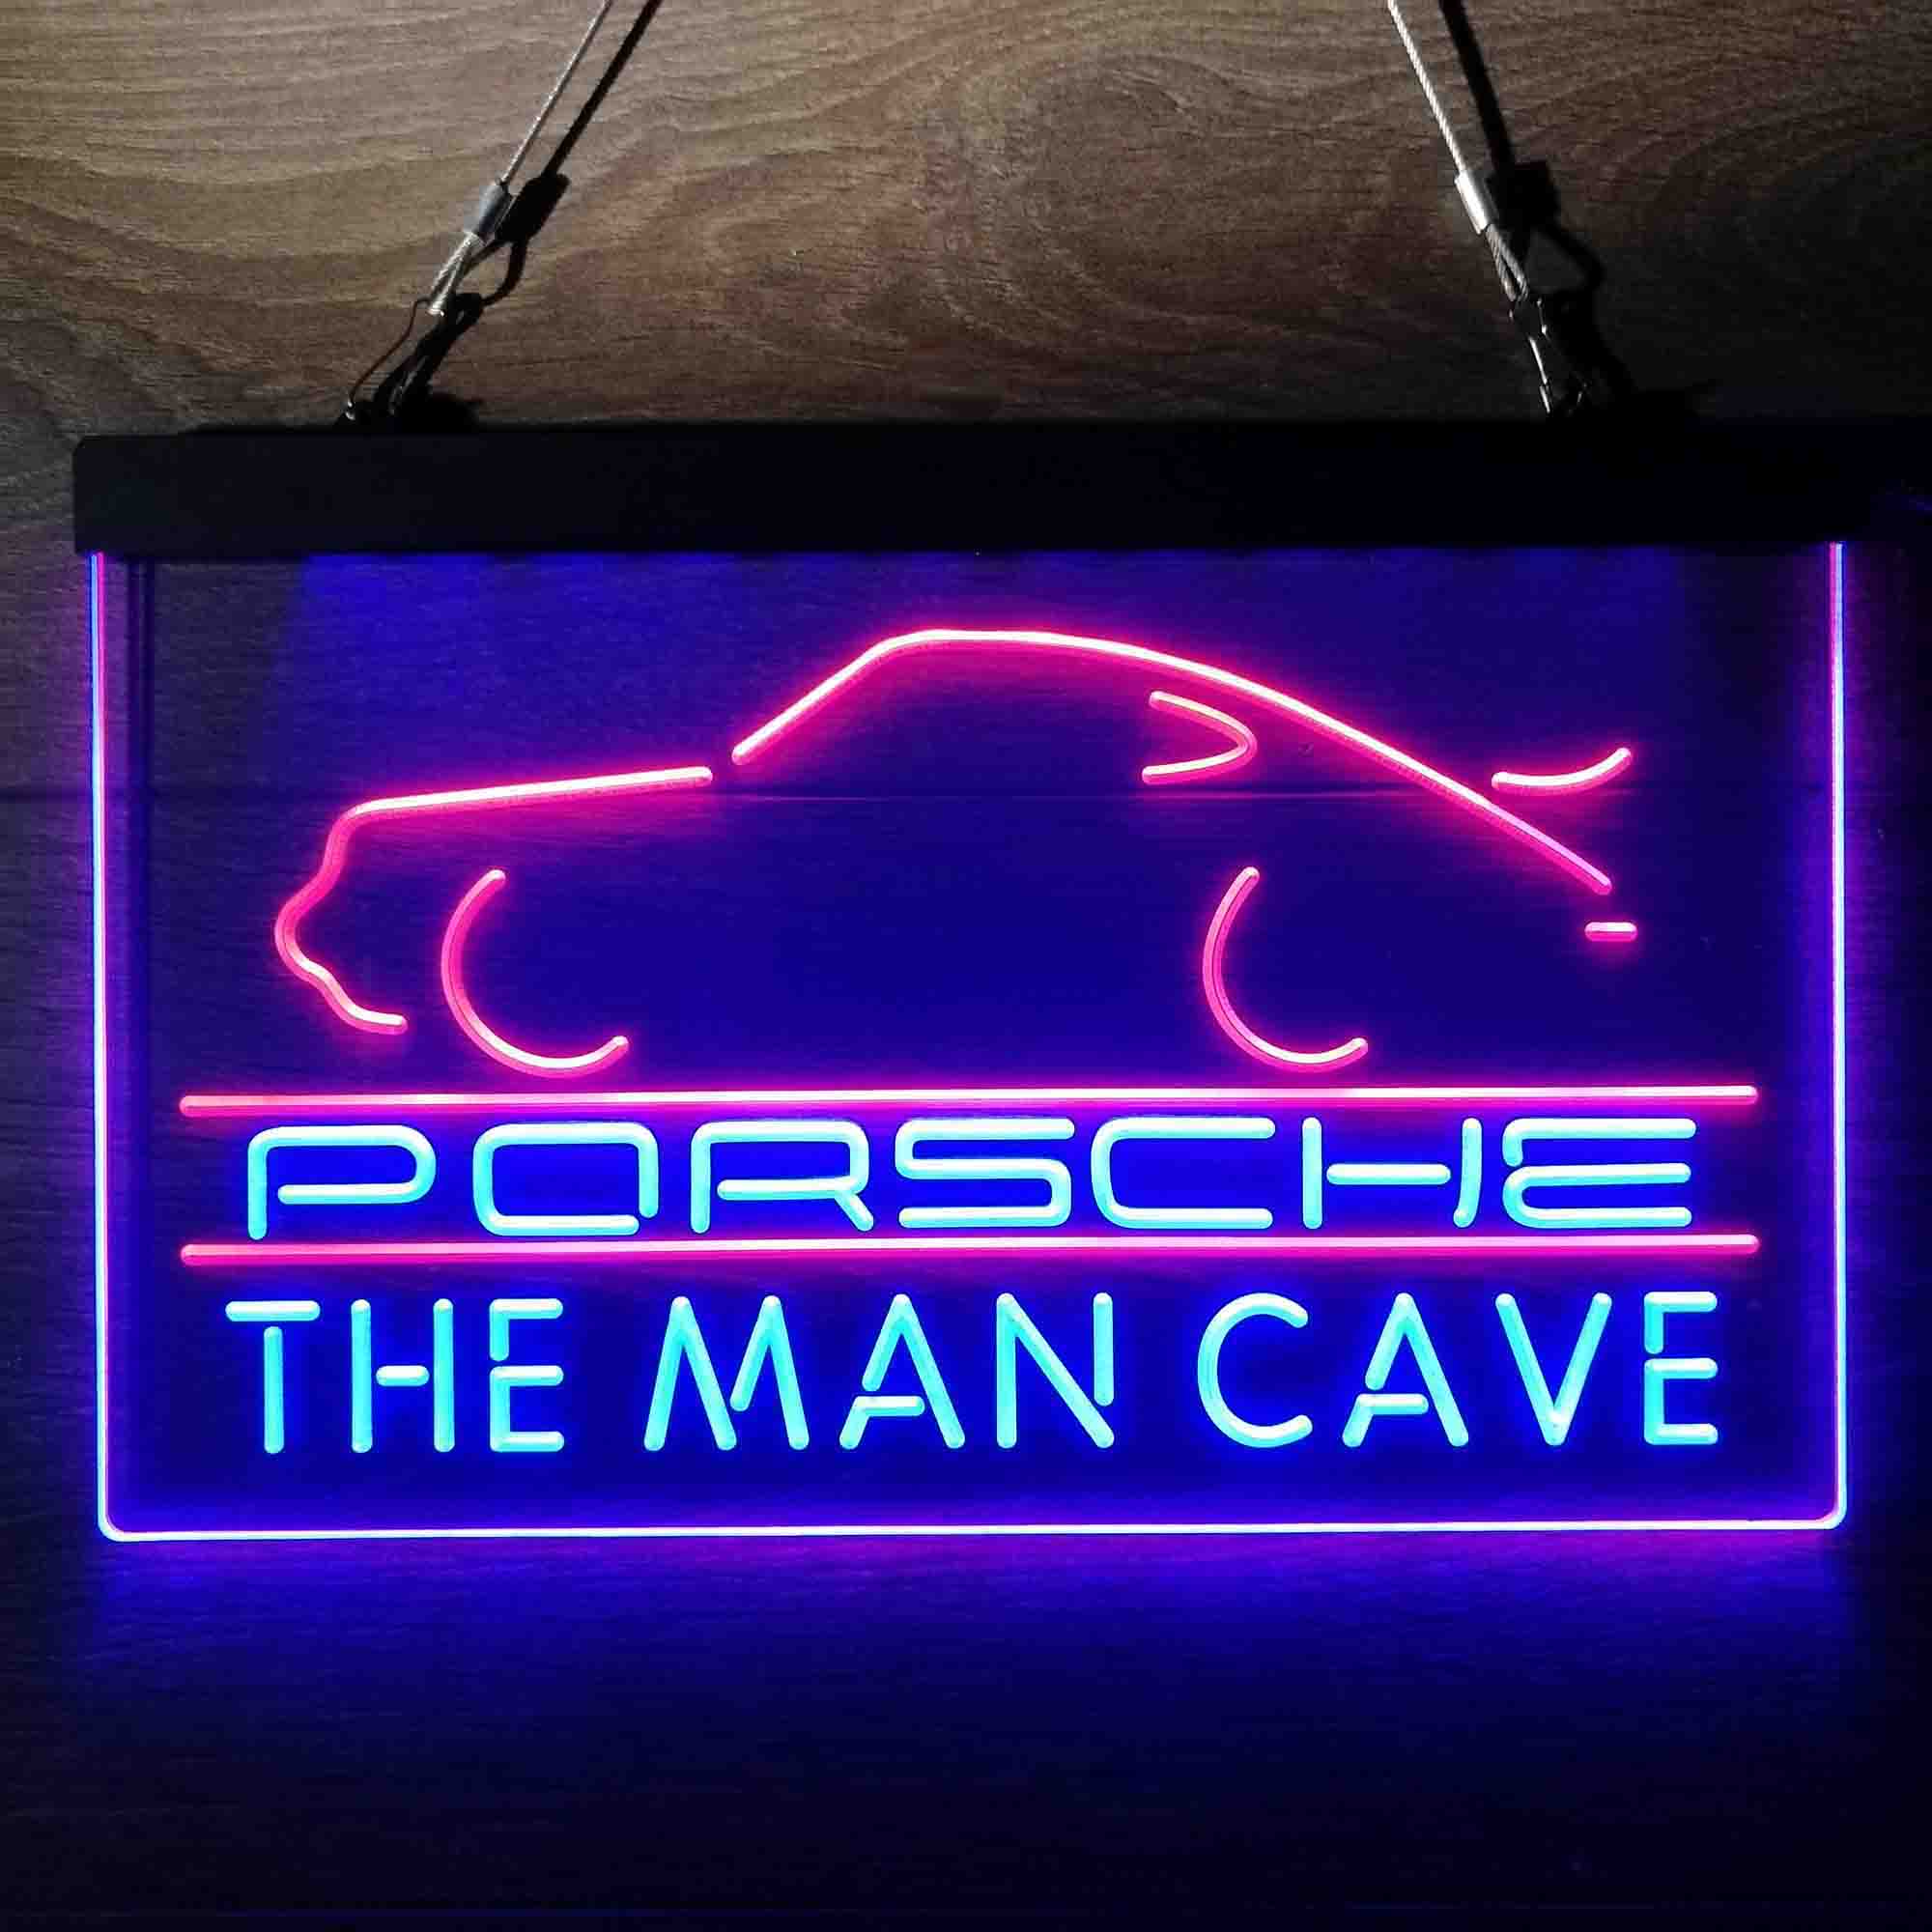 Personalized Porsche Garage Neon-Like LED Sign